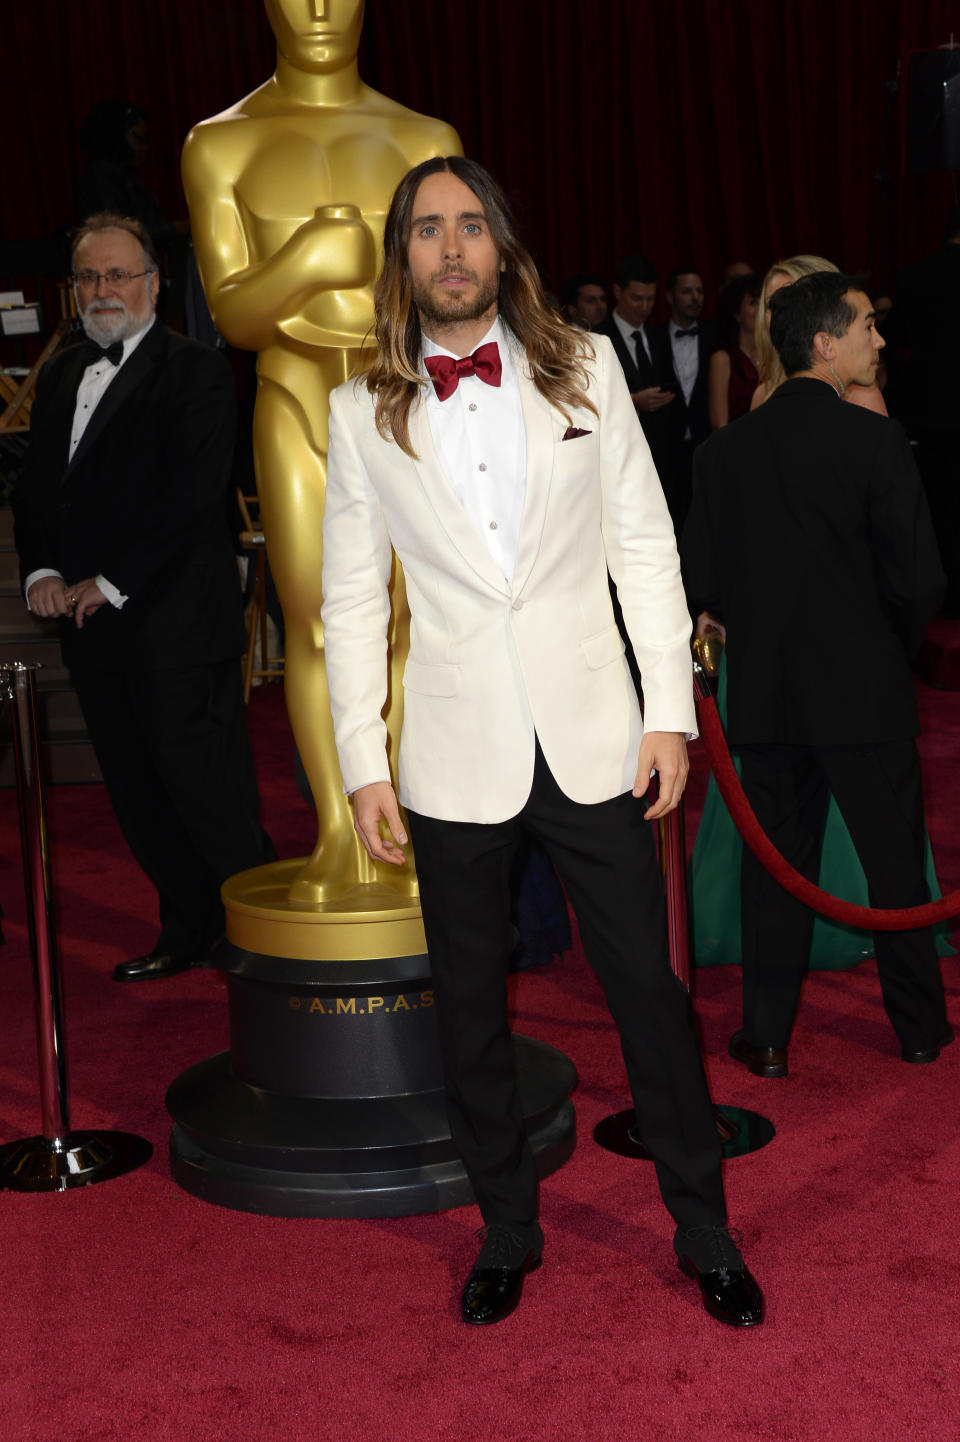 Jared Leto arrives at the Oscars on Sunday, March 2, 2014, at the Dolby Theatre in Los Angeles. (Photo by Dan Steinberg/Invision/AP)